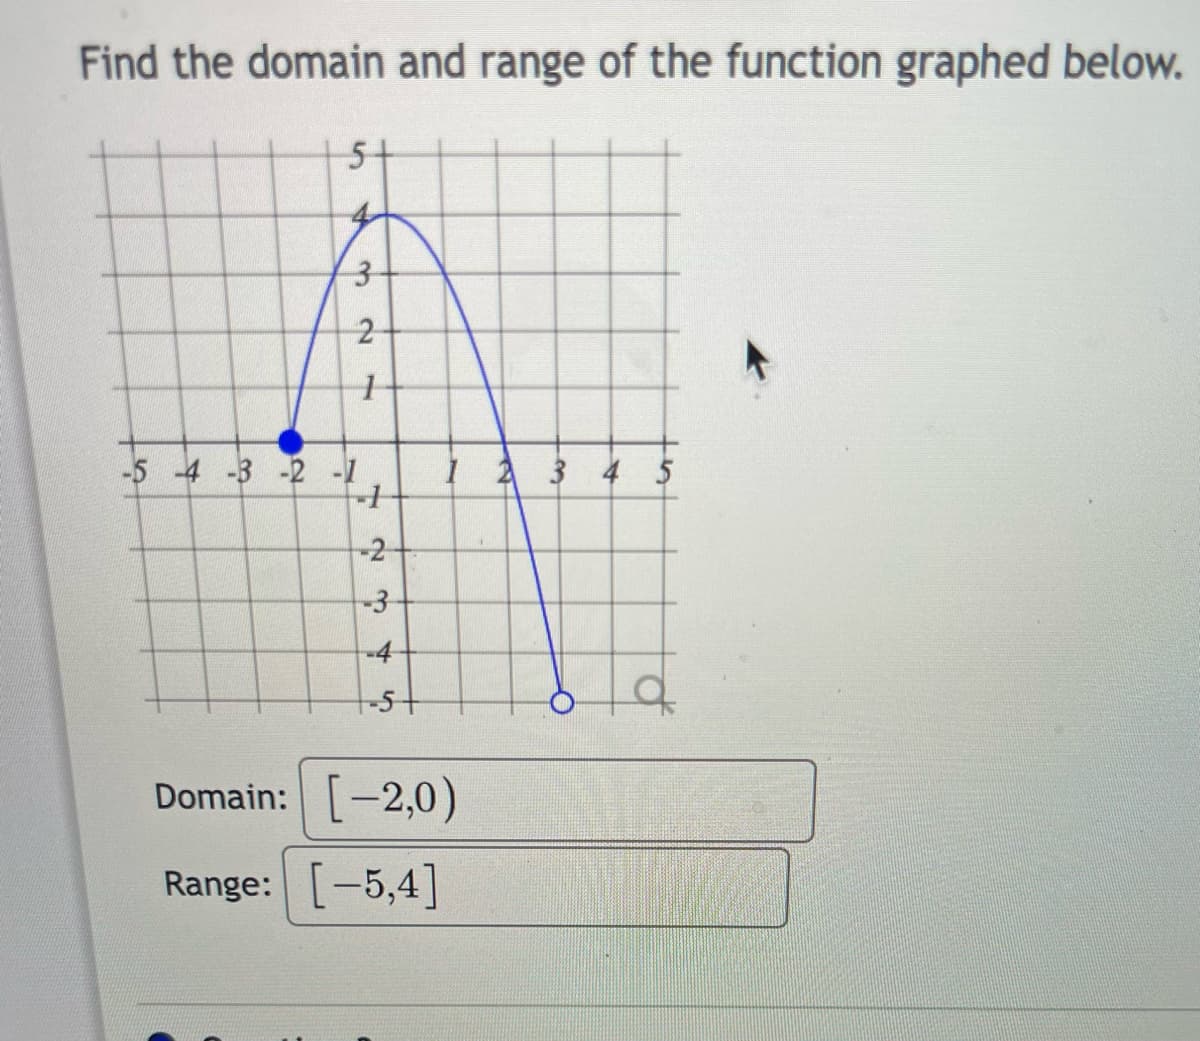 Find the domain and range of the function graphed below.
5+
-5 -4 -3 -2 -1
3 4
32
2-
1
1
-2
-3
-4
-5+
Domain: [-2,0)
Range: [-5,4]
q